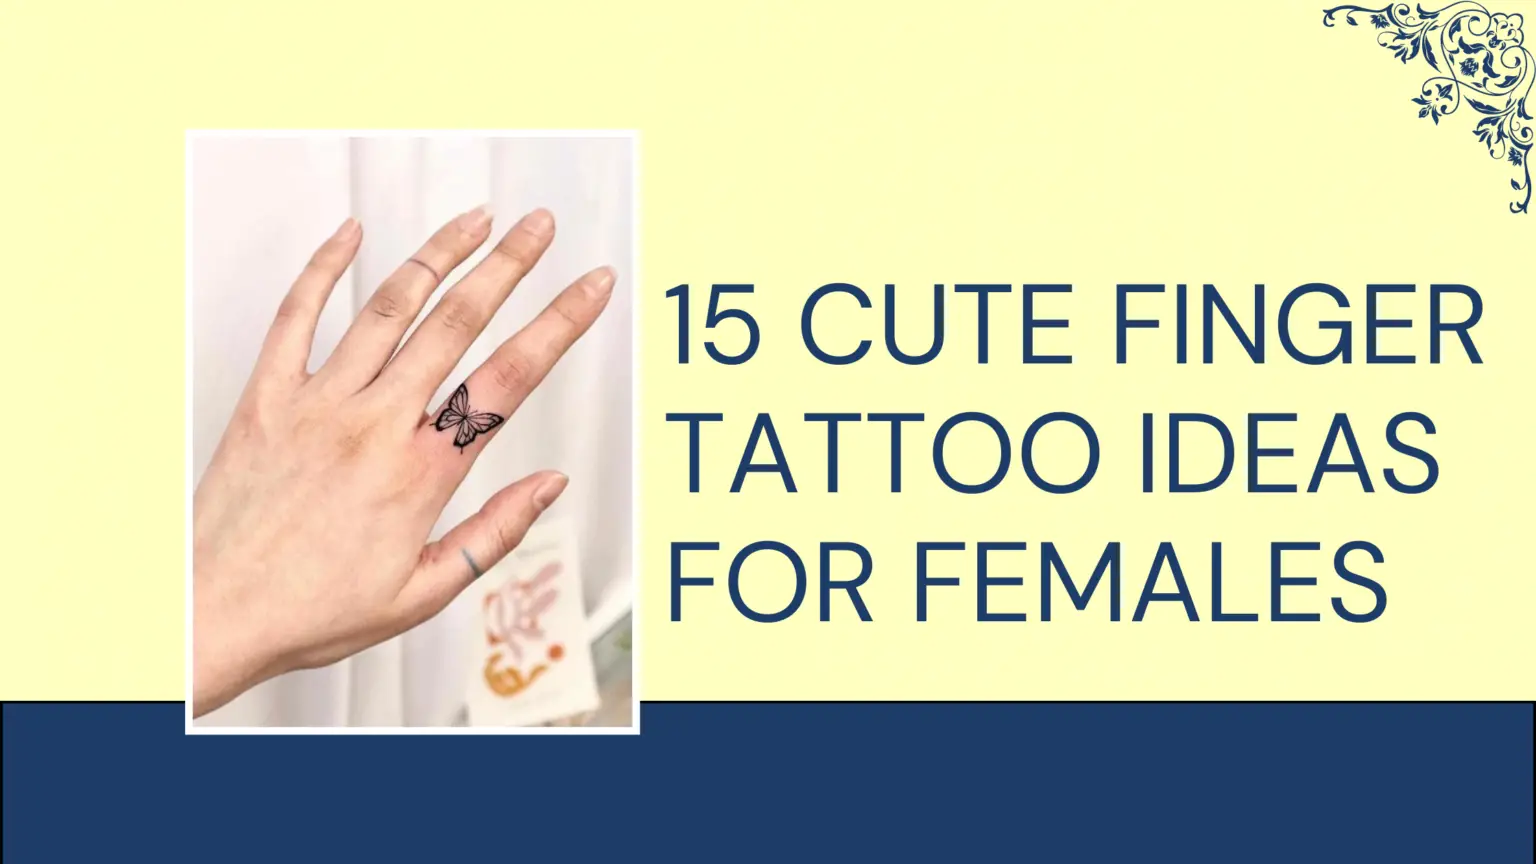 Girly Finger Tattoos: 15 Cute Tattoo Ideas For Females or Women - That ...